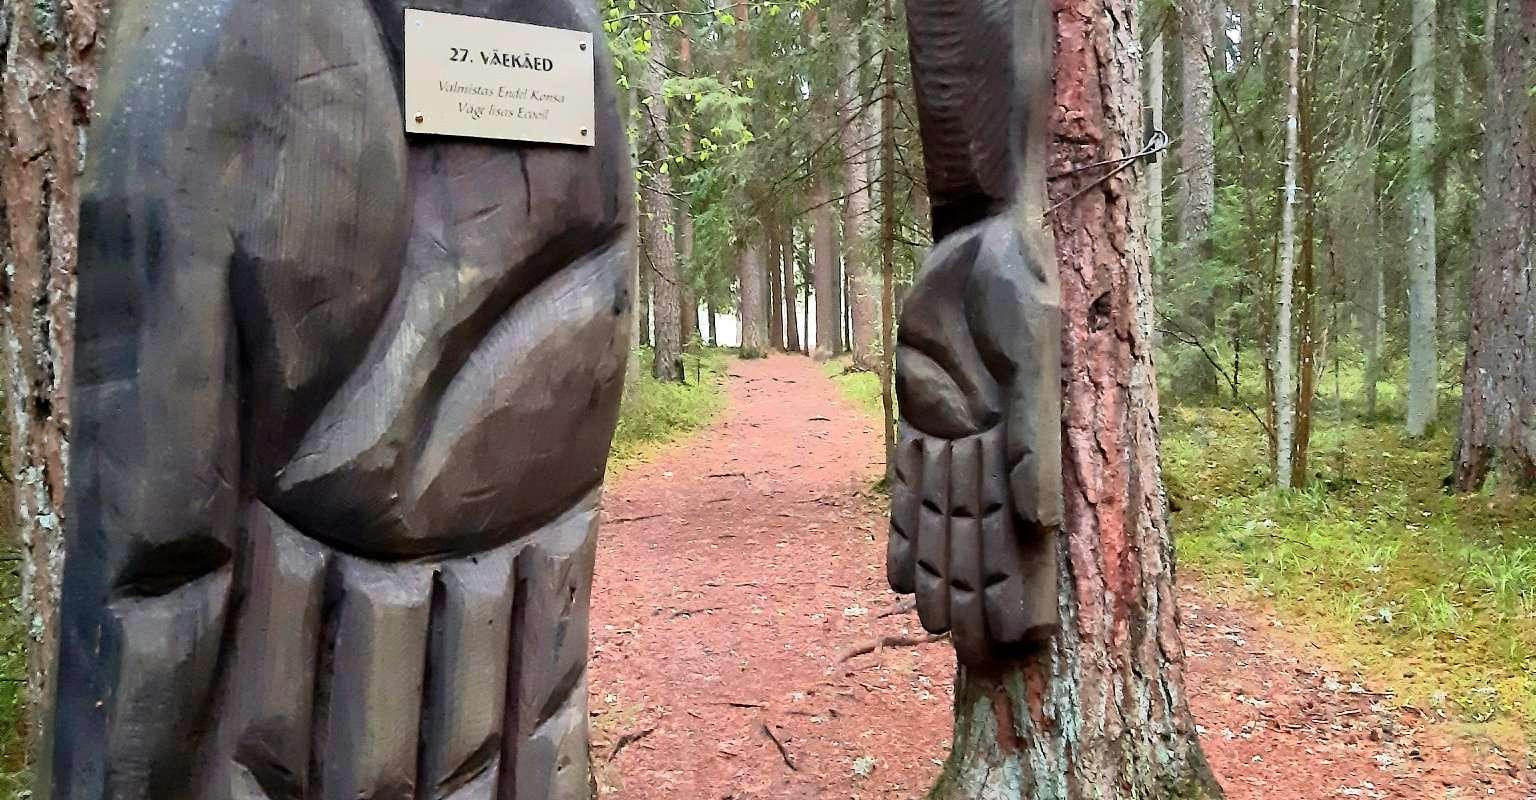 Wooden sculpture ‘Väe käed’ on the Nature Energy Trail